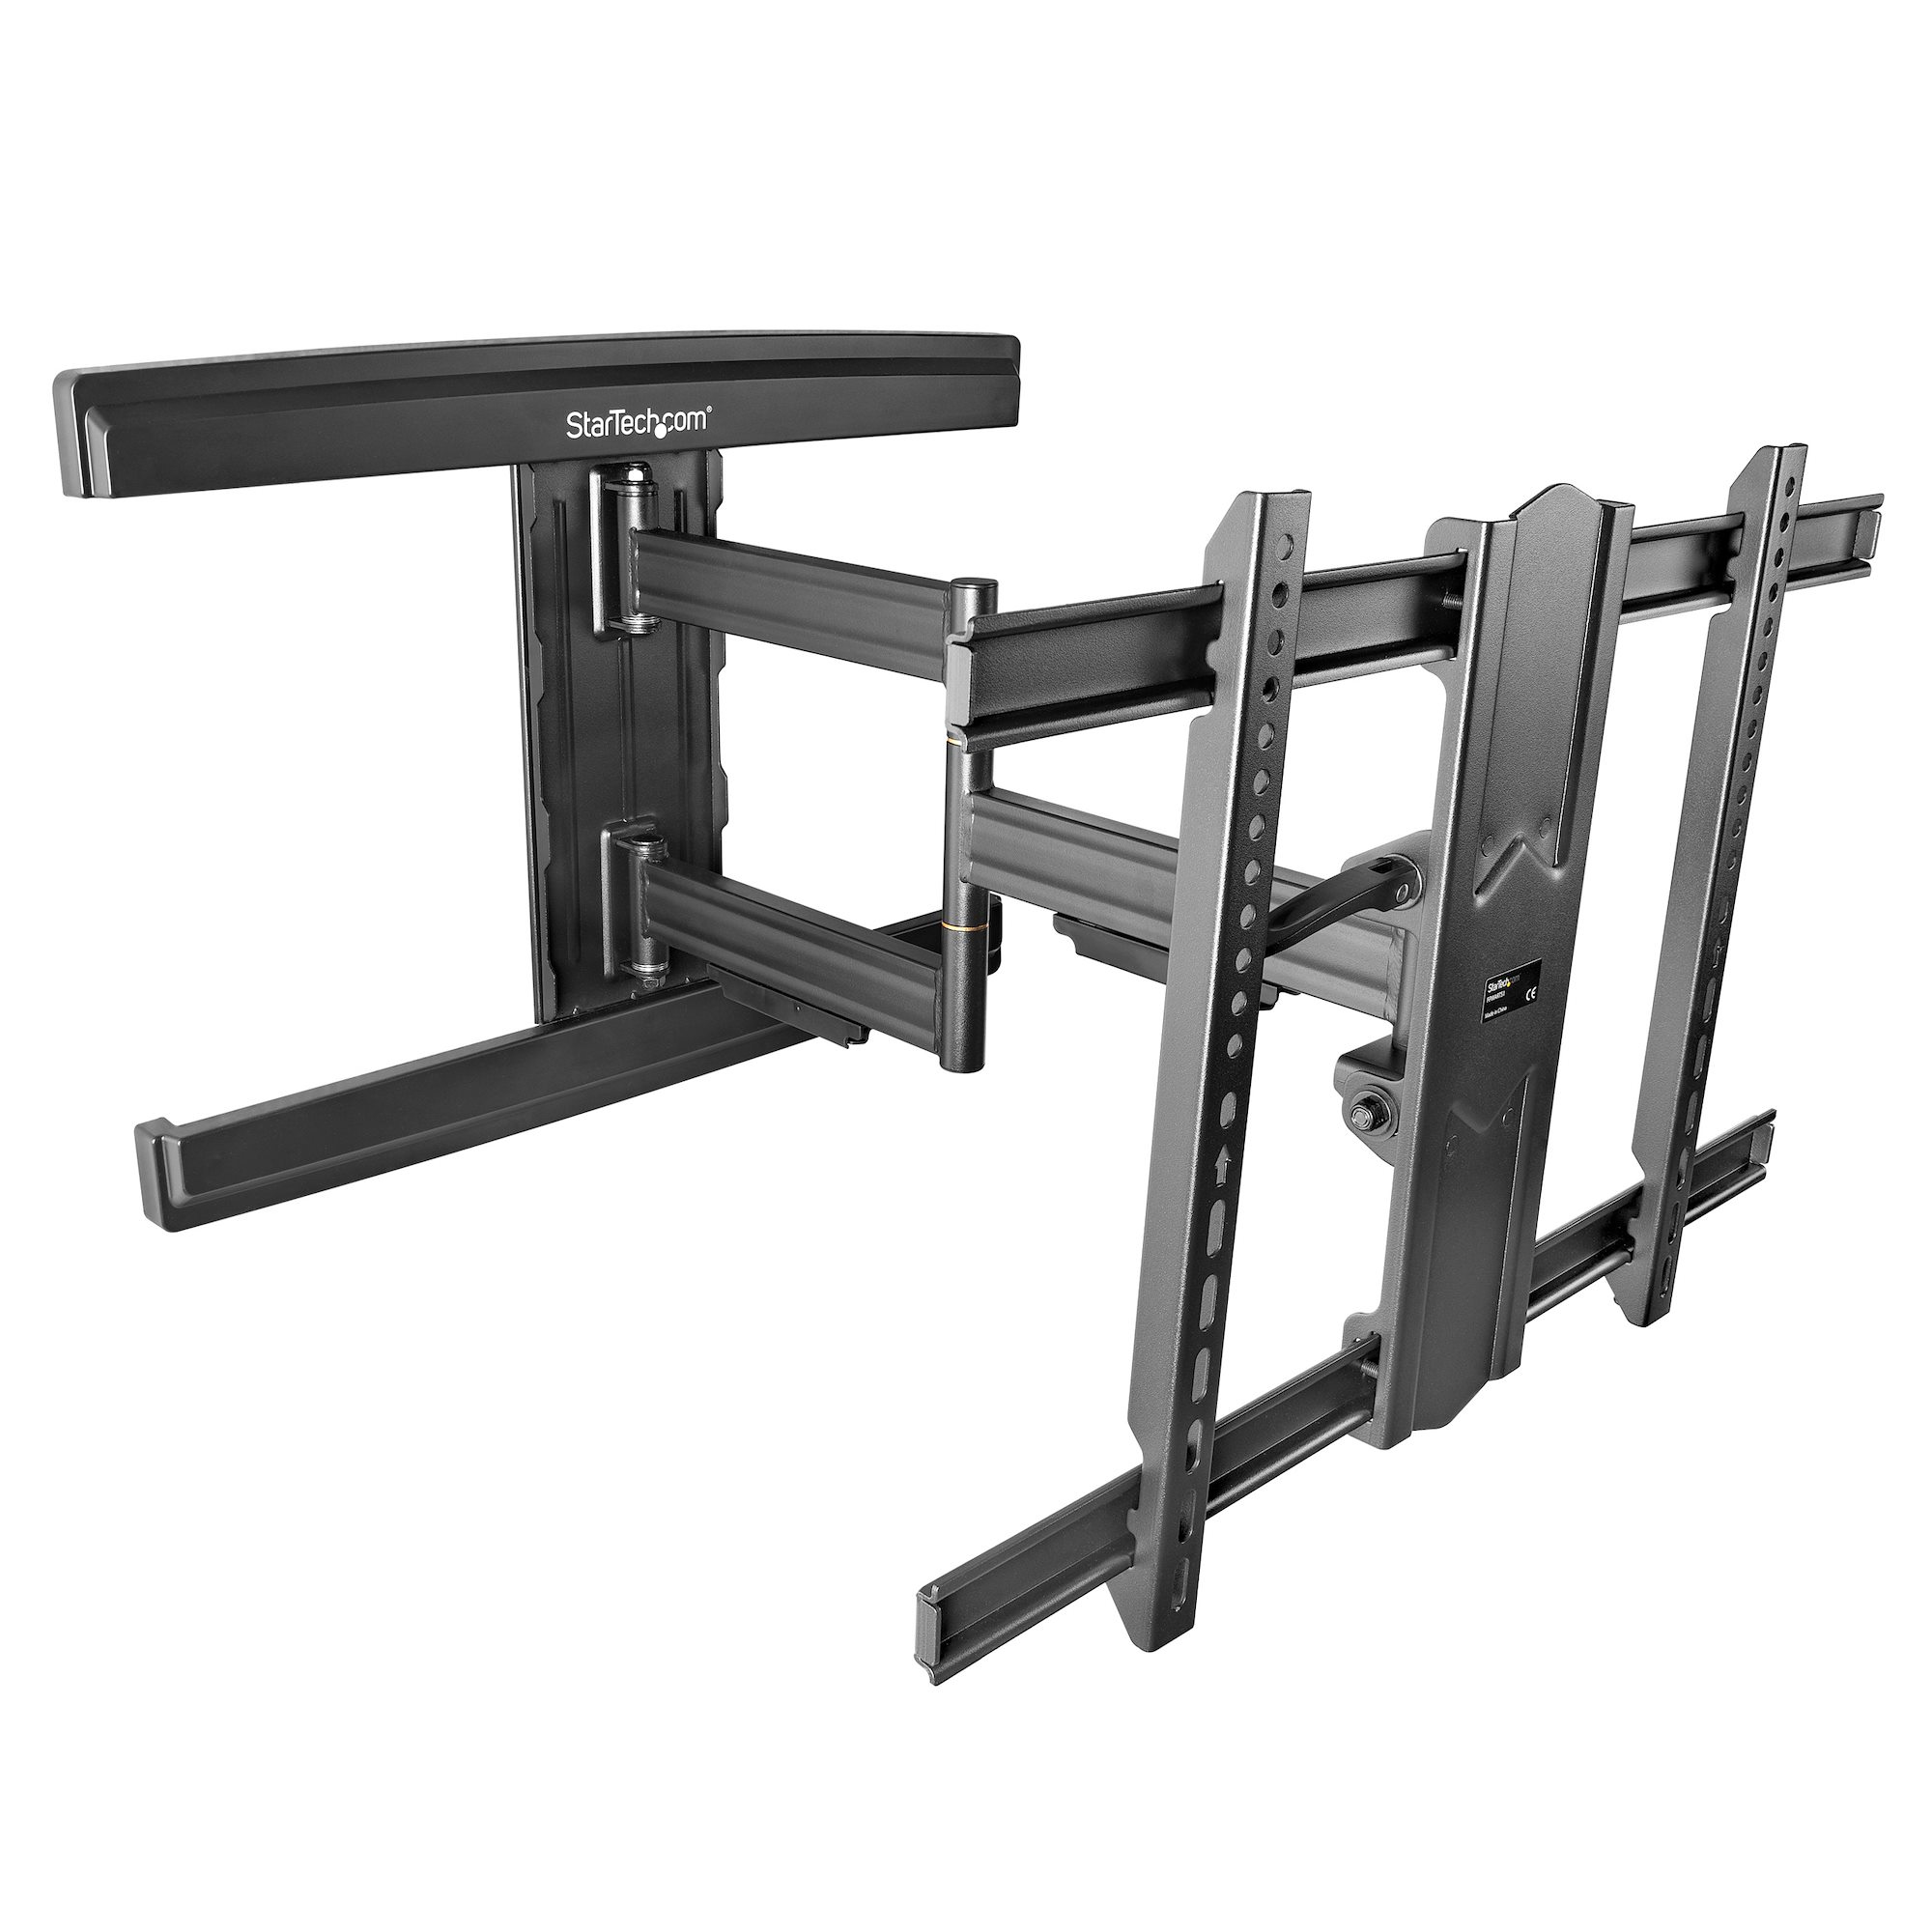 StarTech.com TV Wall Mount for up to 80 inch (110lb)